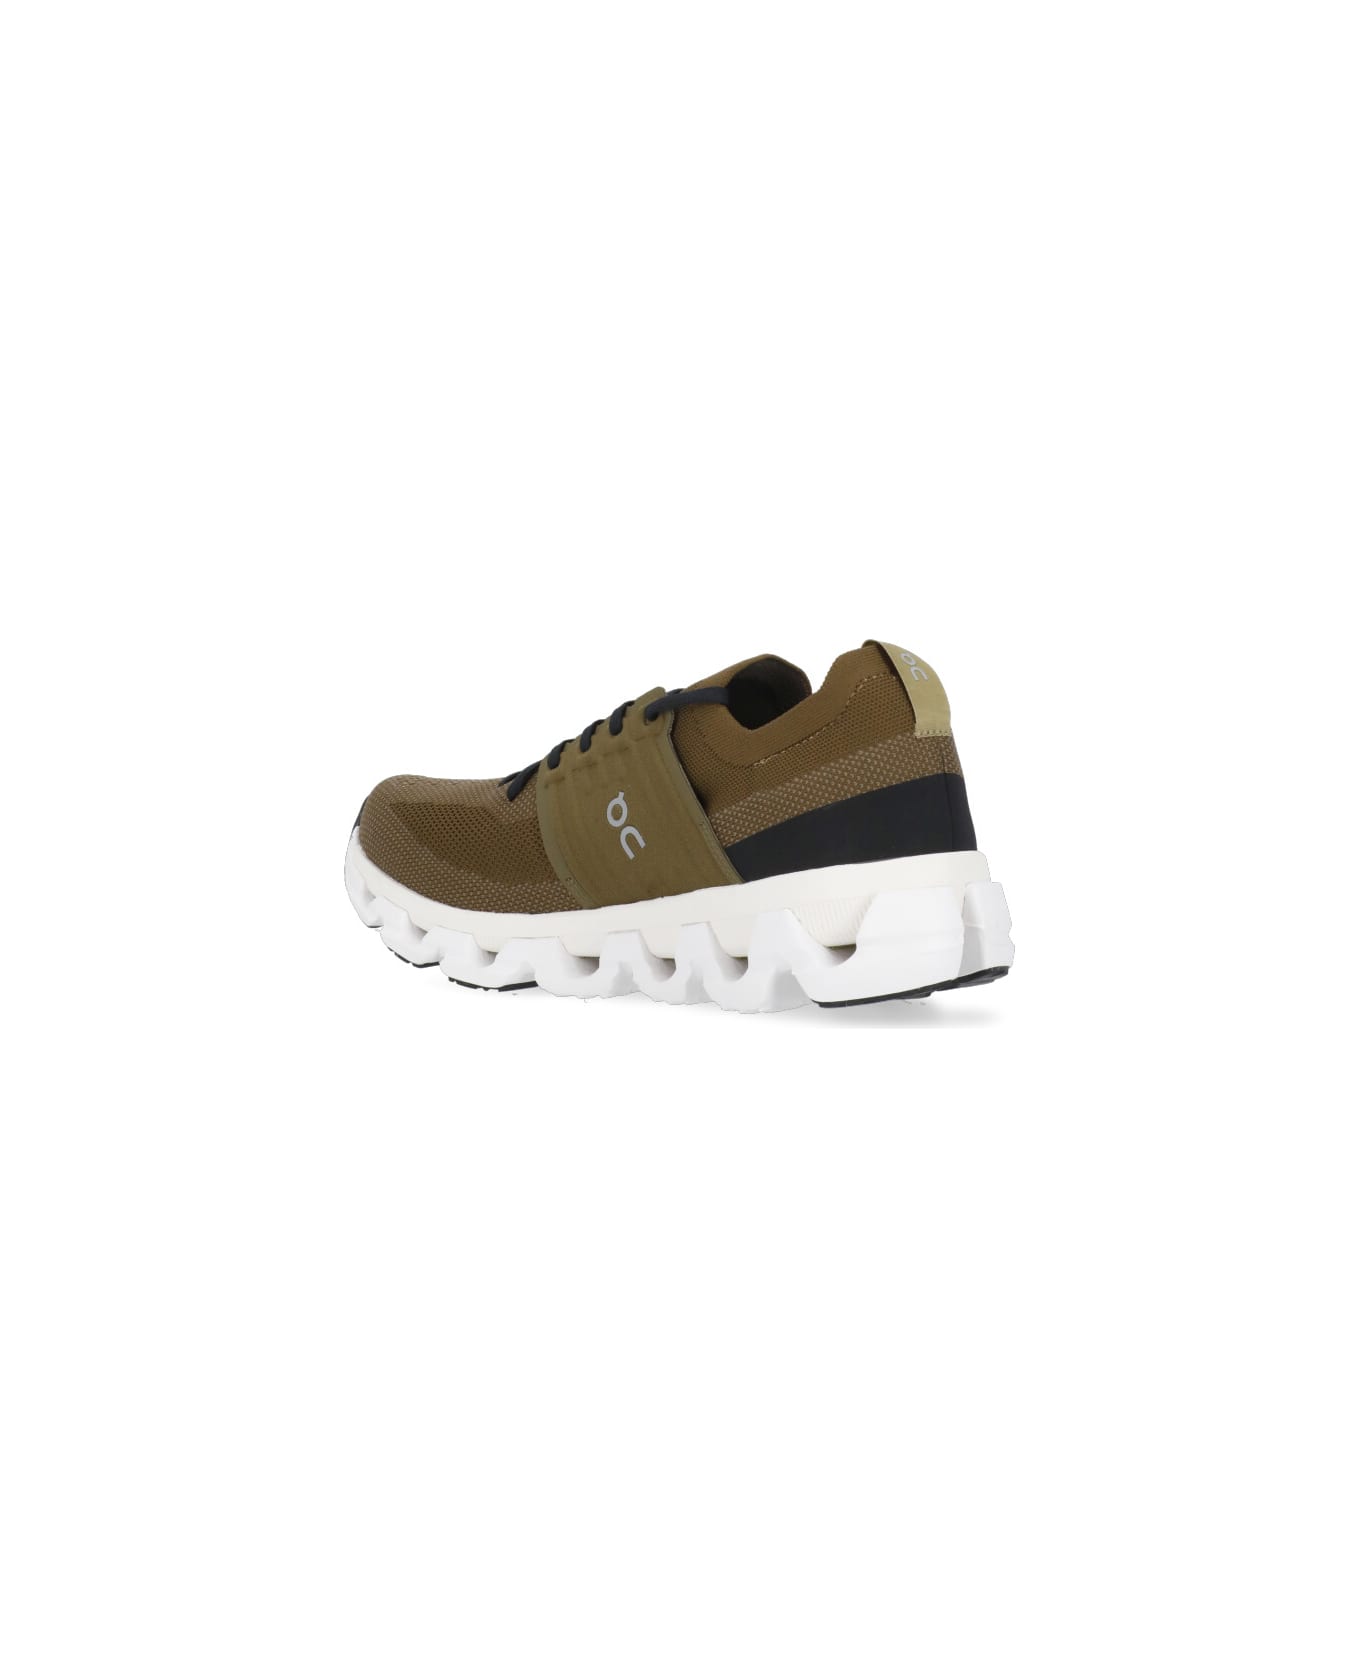 ON Cloudswift 3 Sneakers - Brown スニーカー